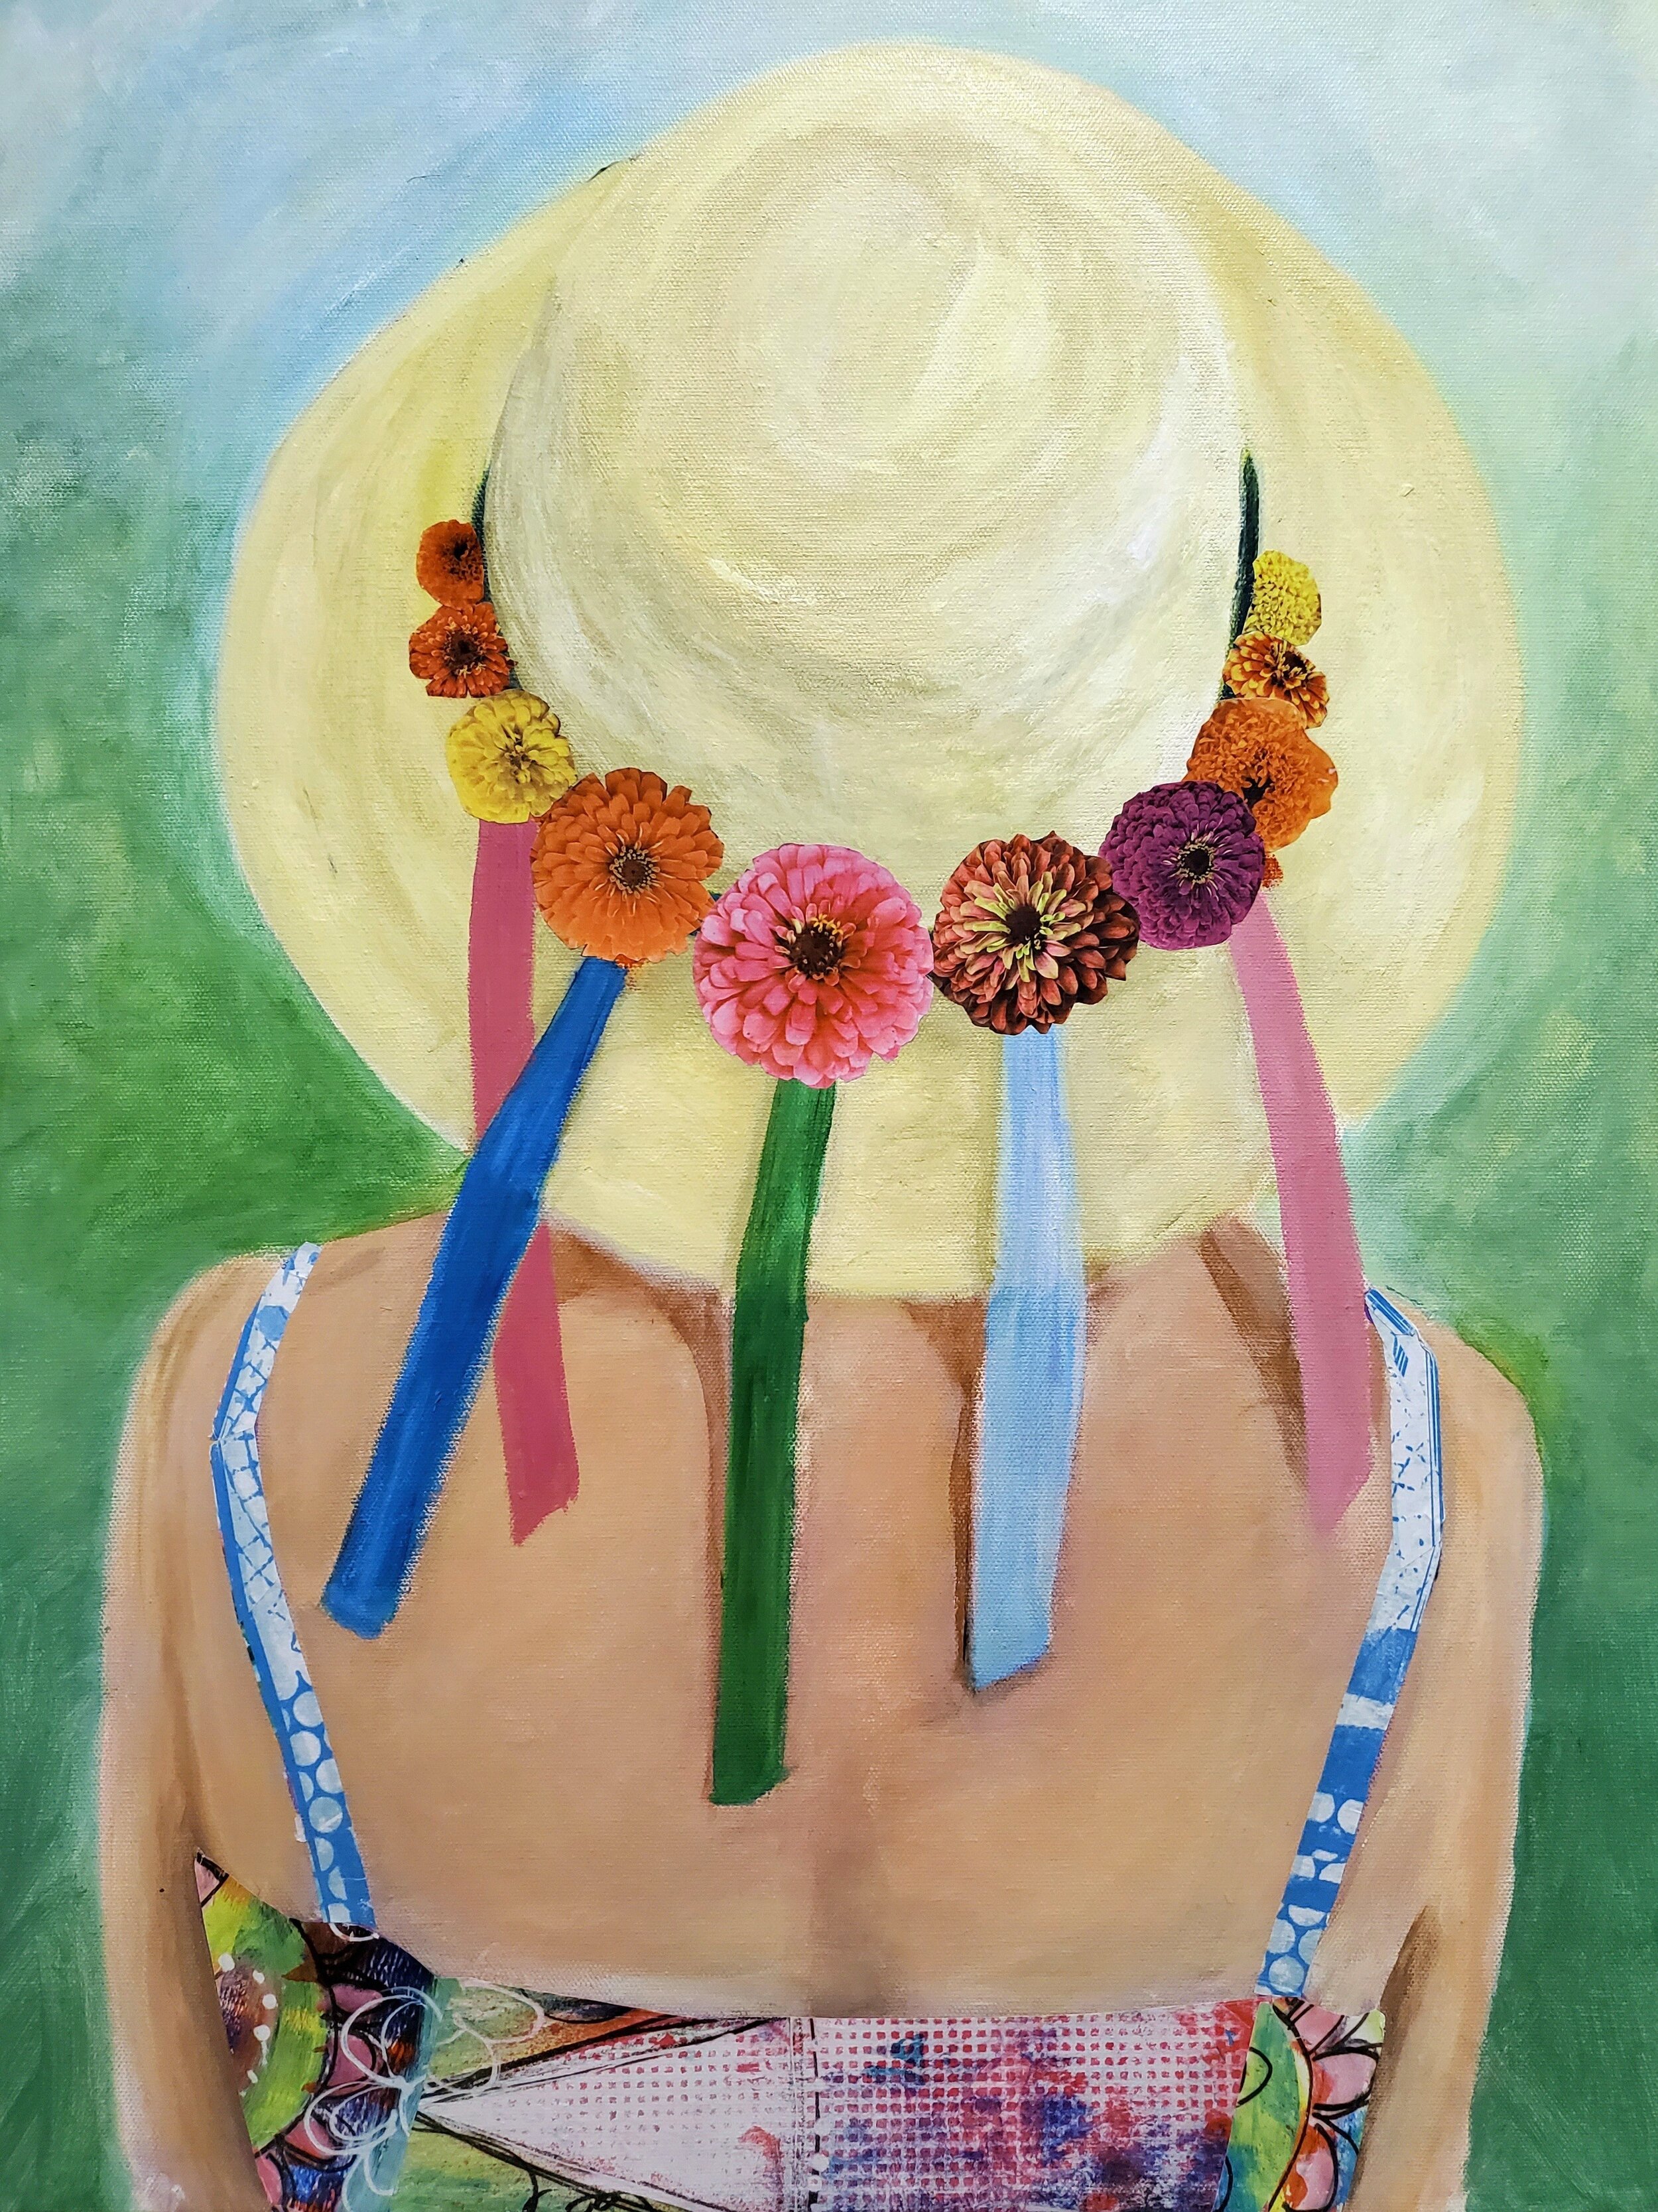 Woman in Straw Hat with Flowers and Ribbons